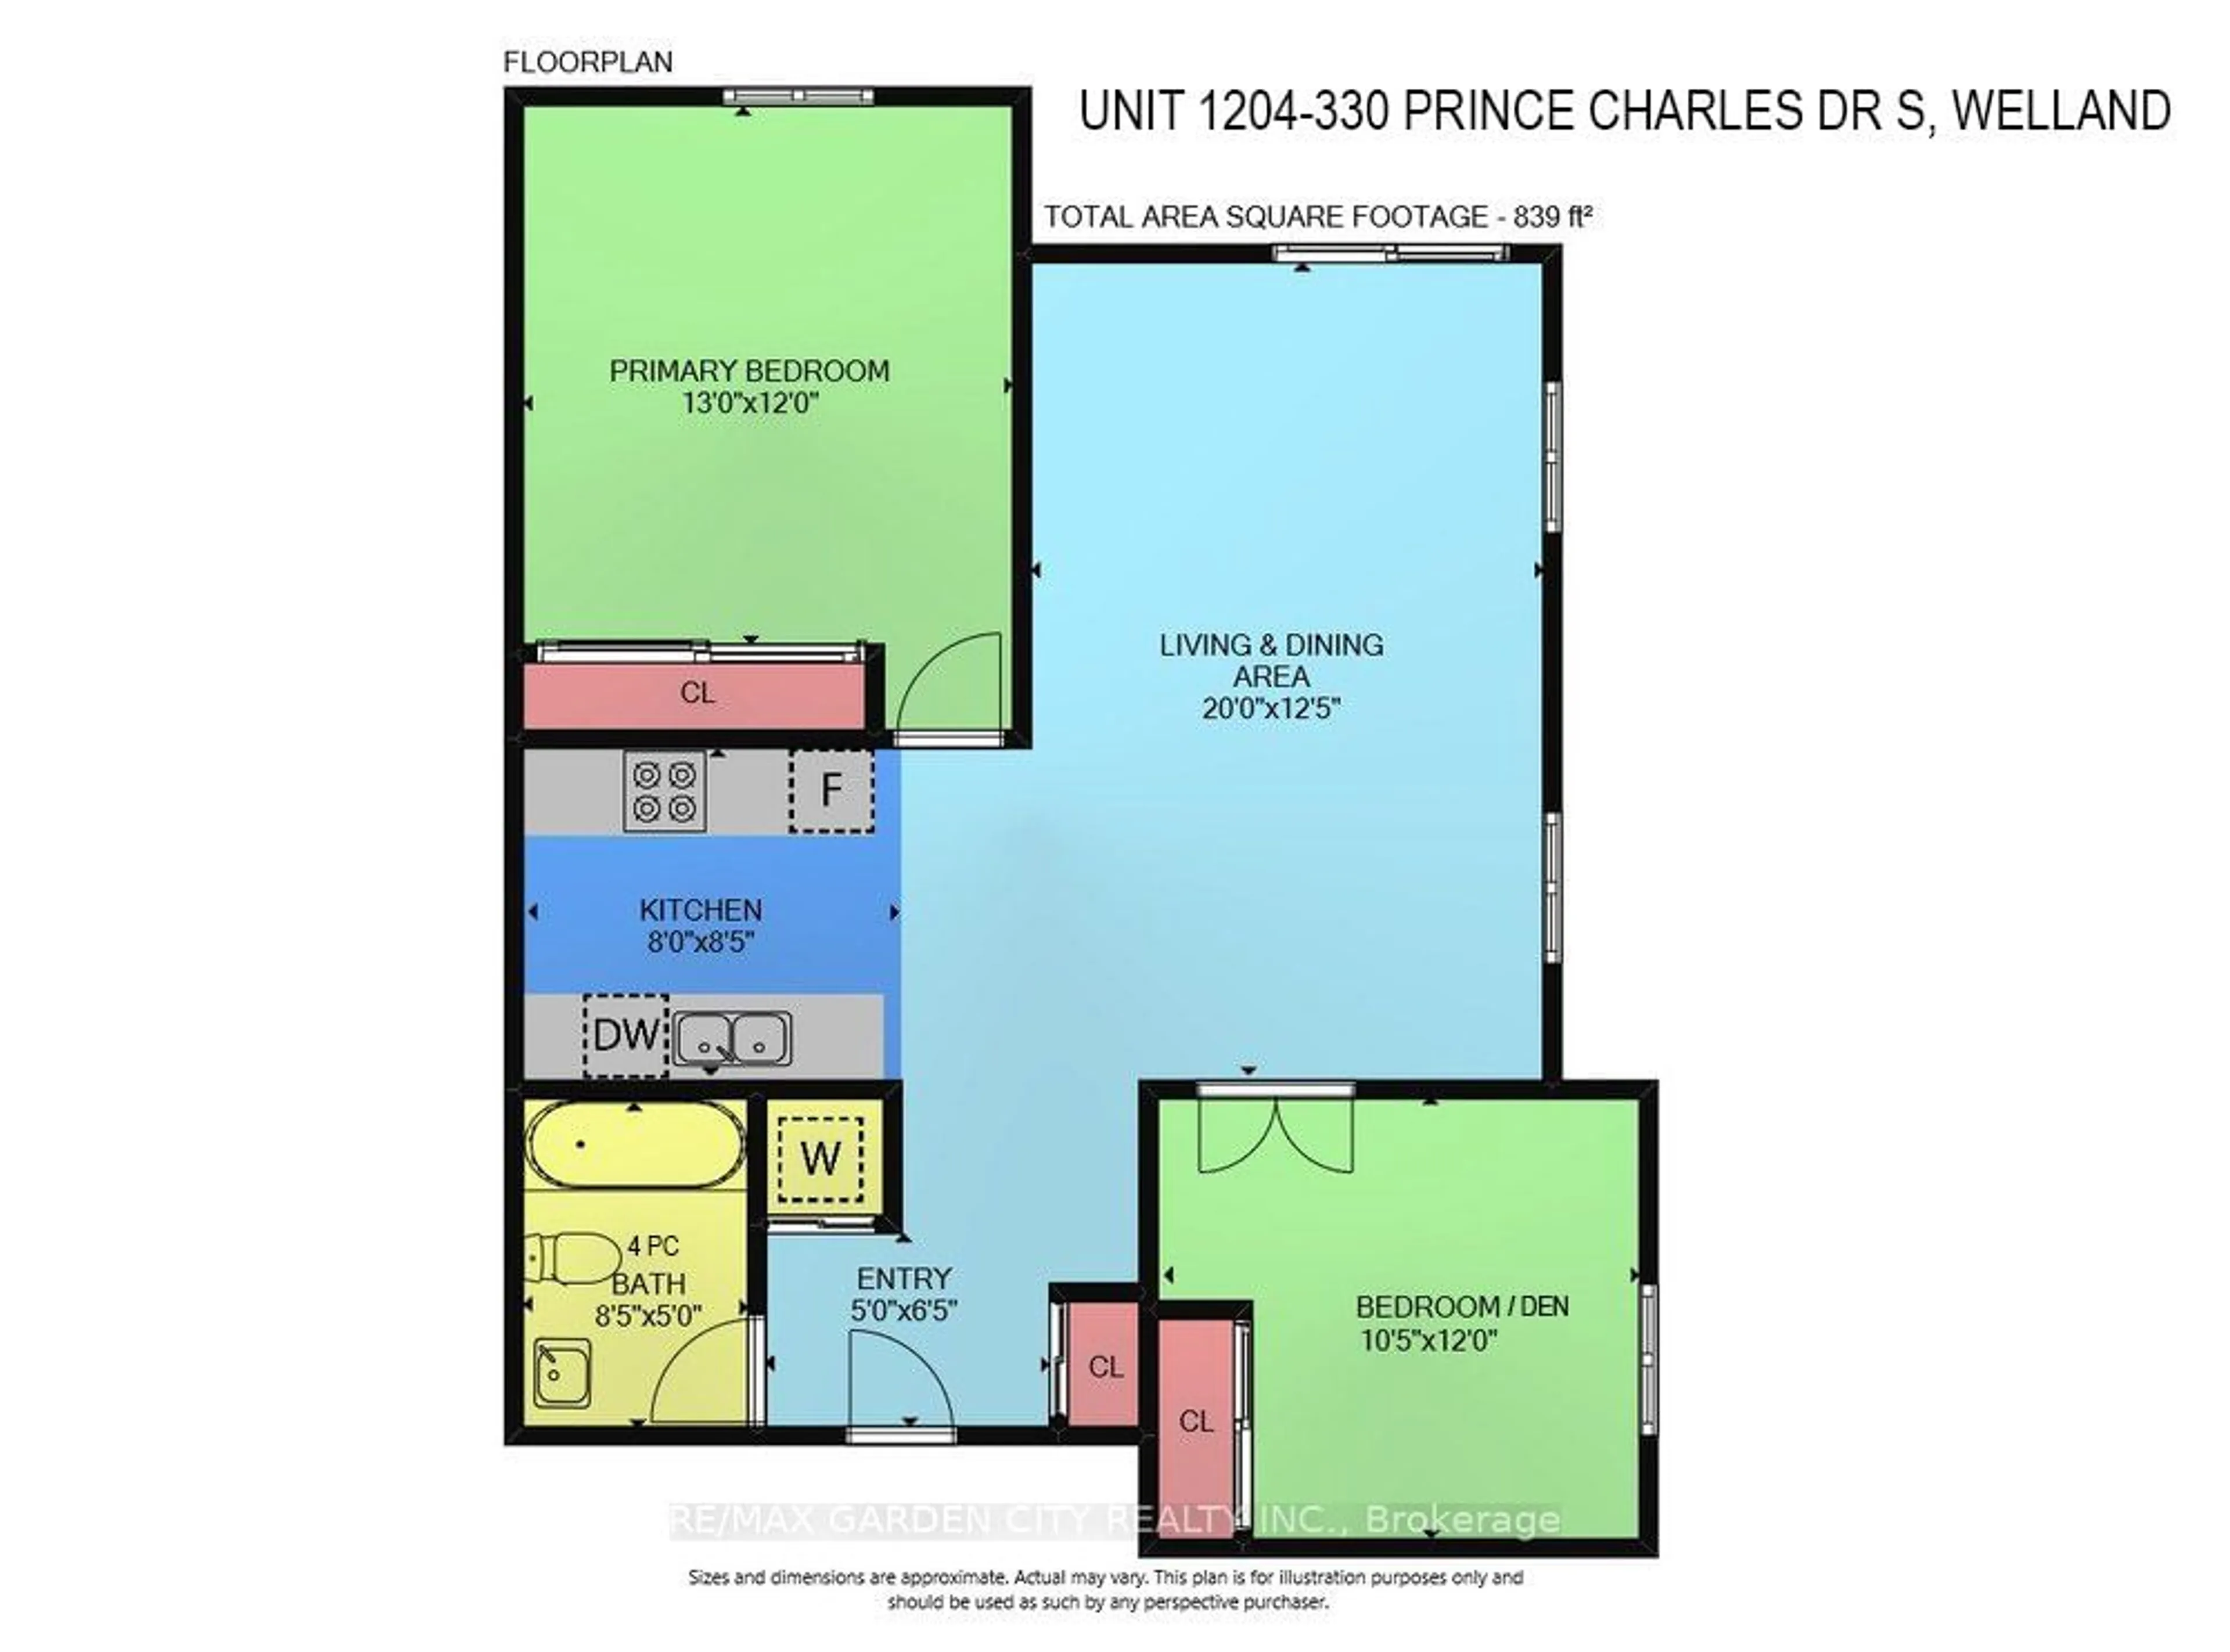 Floor plan for 330 Prince Charles Dr #1204, Welland Ontario L3C 7B3